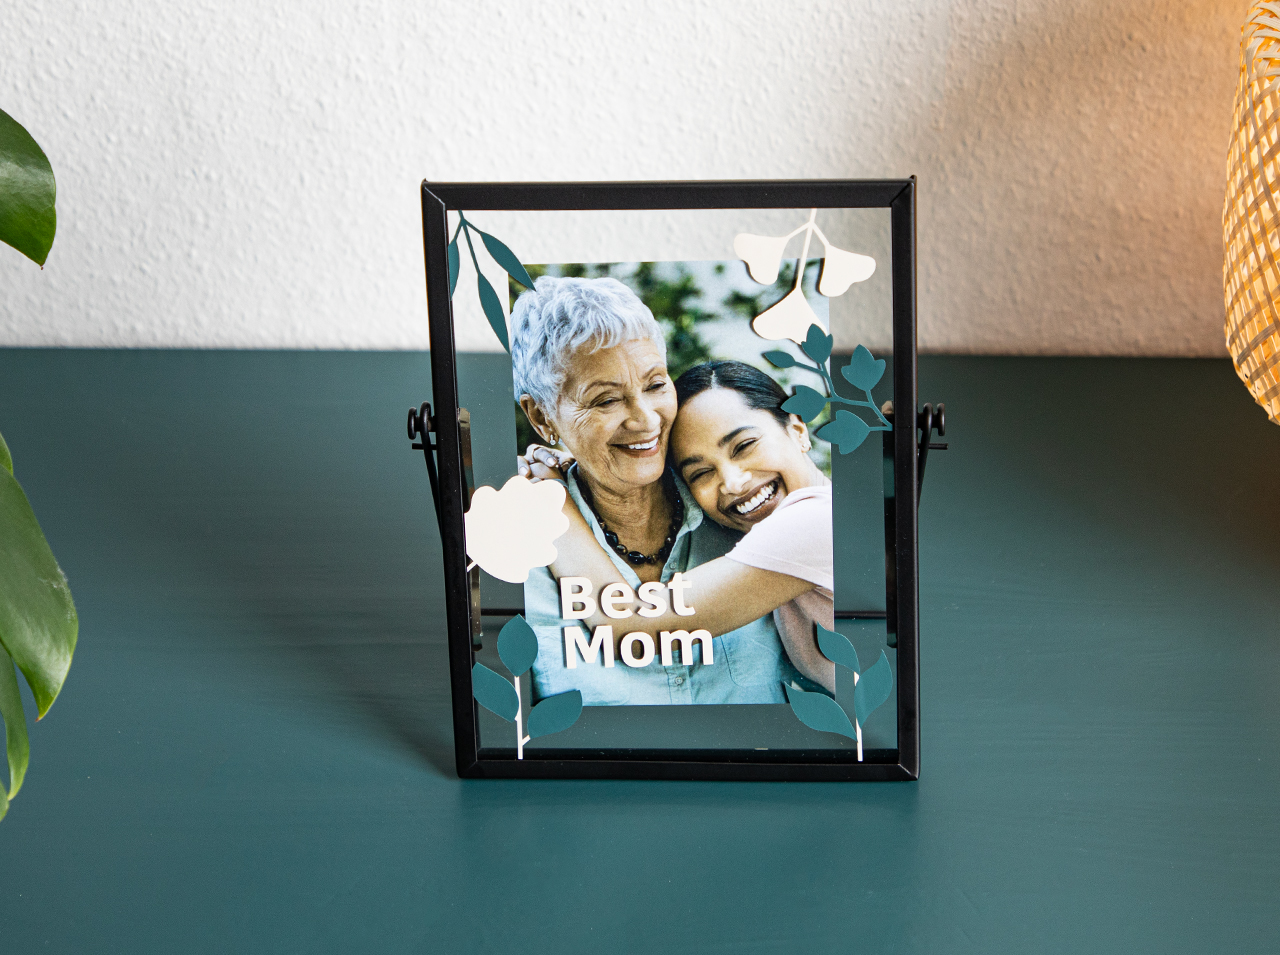 A transparent photo frame with a photo, decorated with flowers made from adhesive foil.